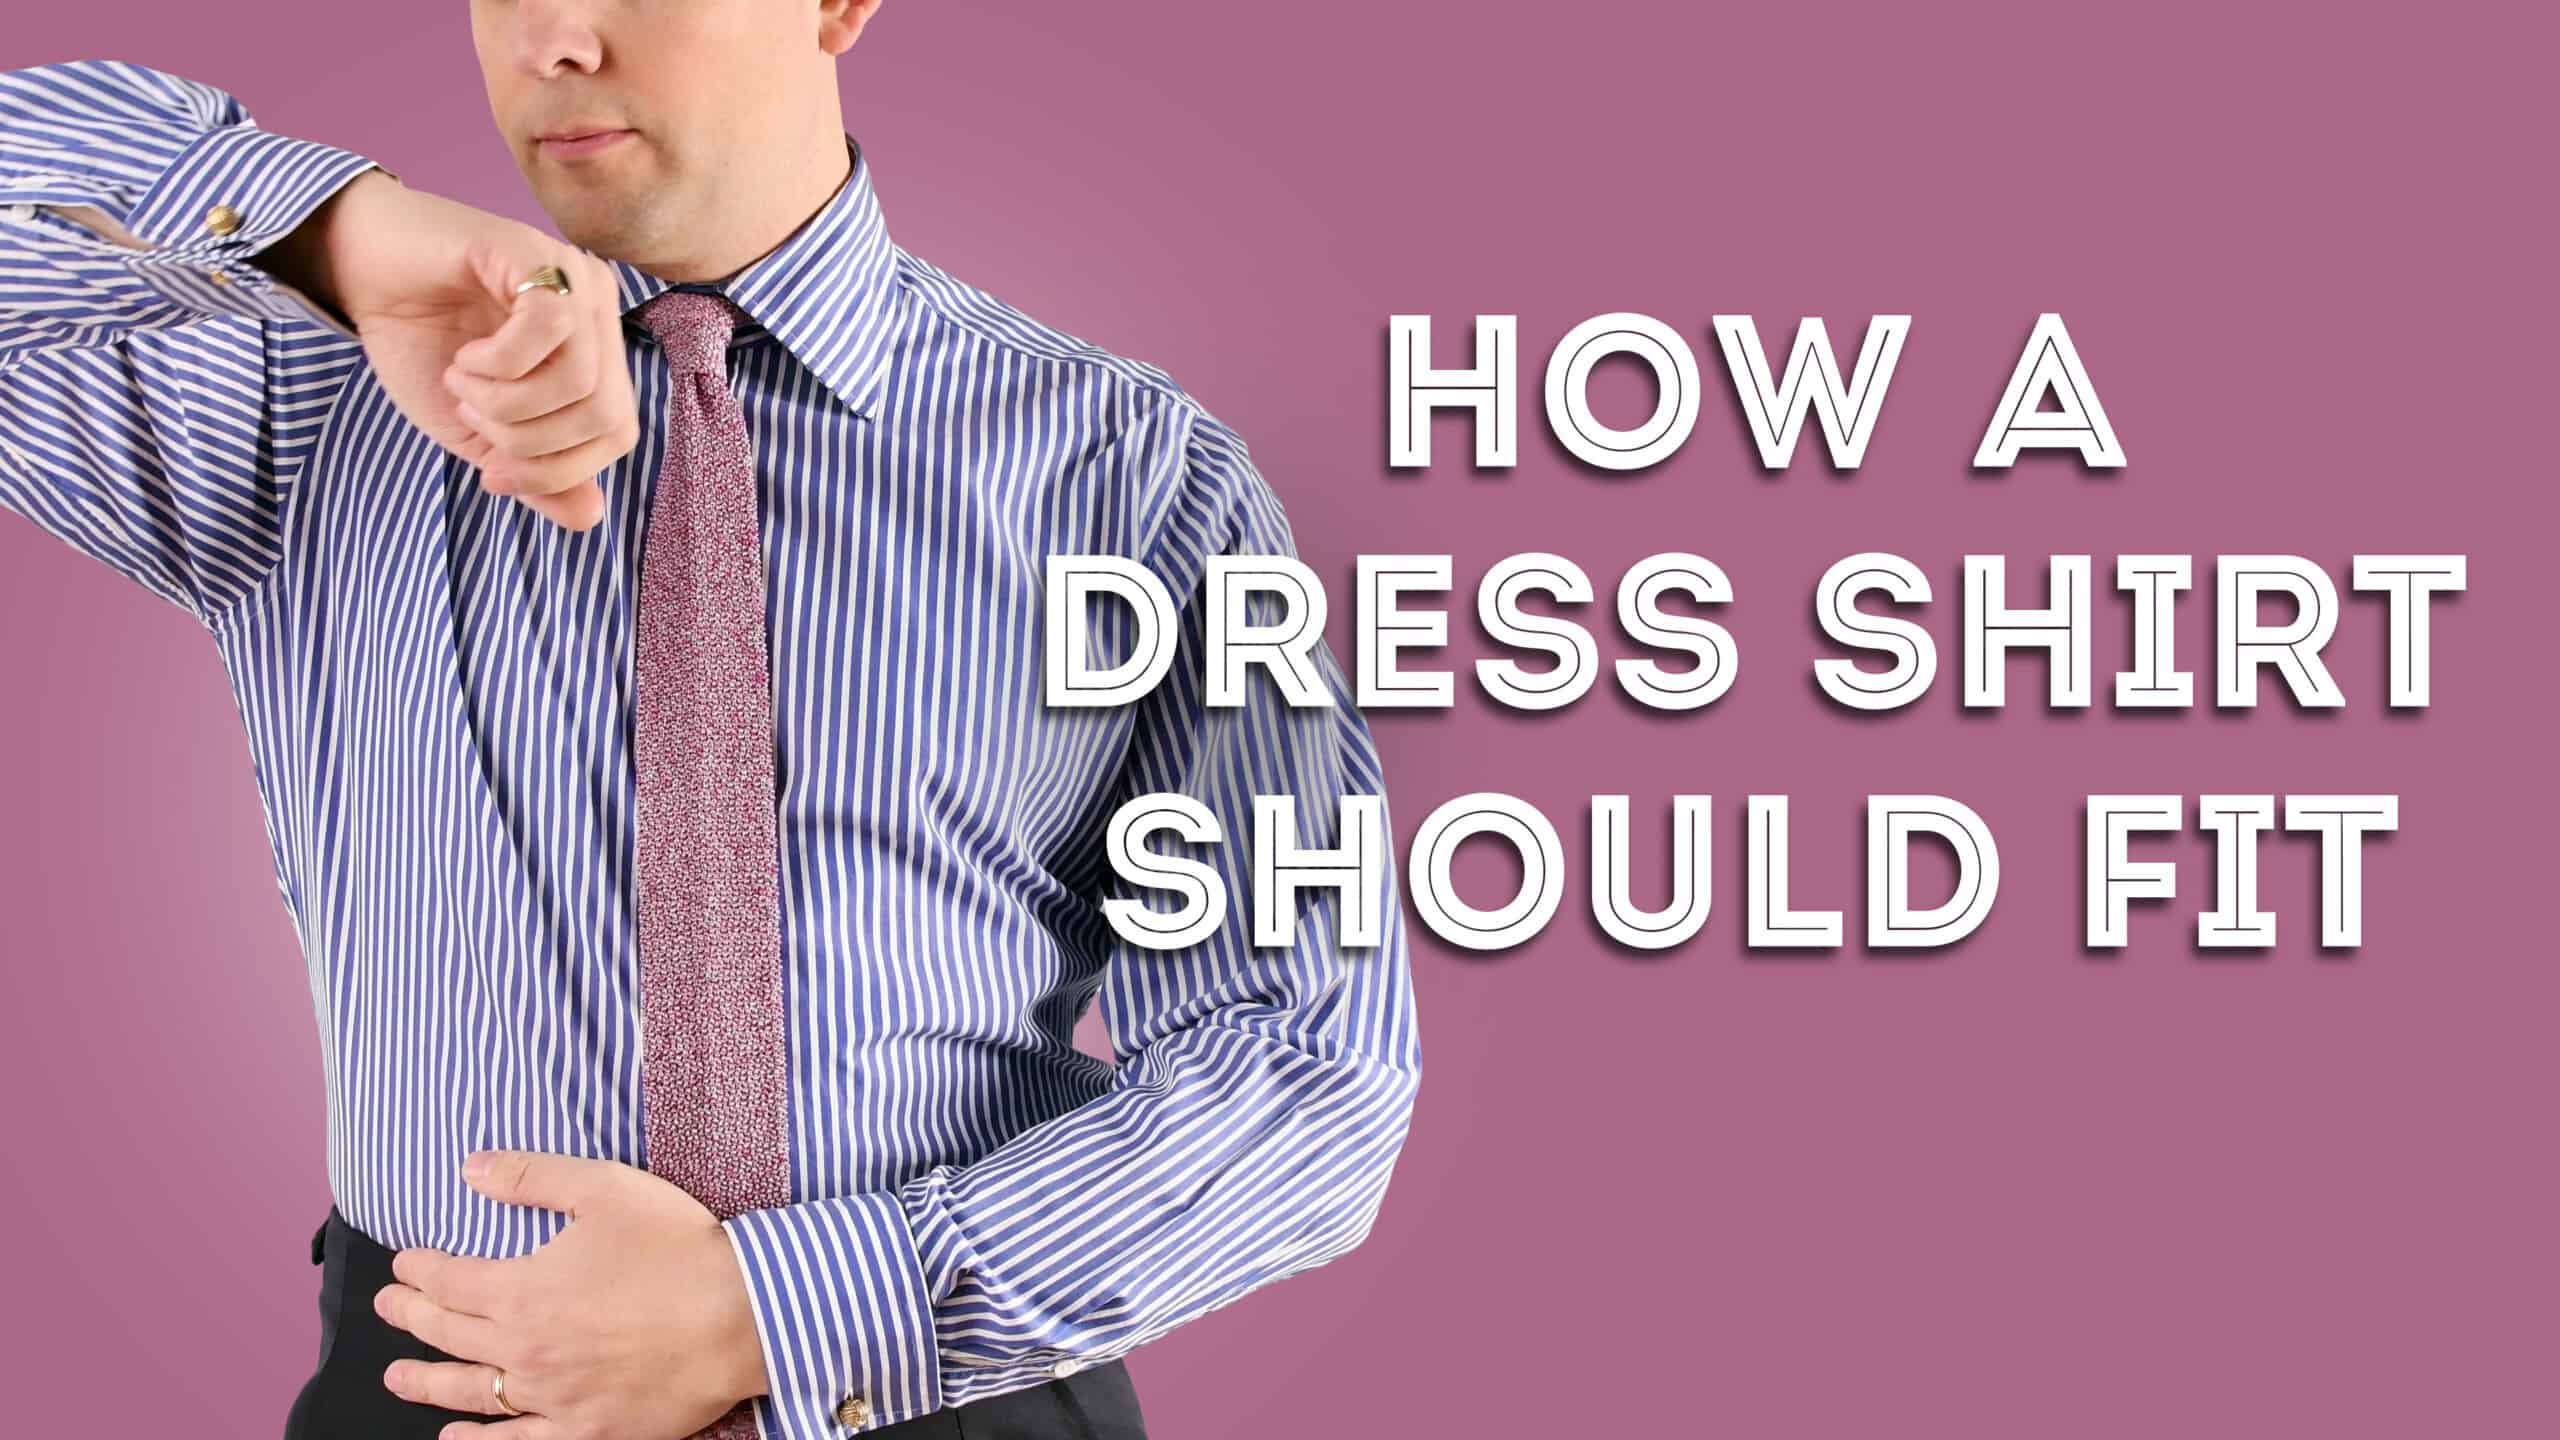 Impure Junior obvious How A Dress Shirt Should Fit - Proper Styling Details For Men's Shirts